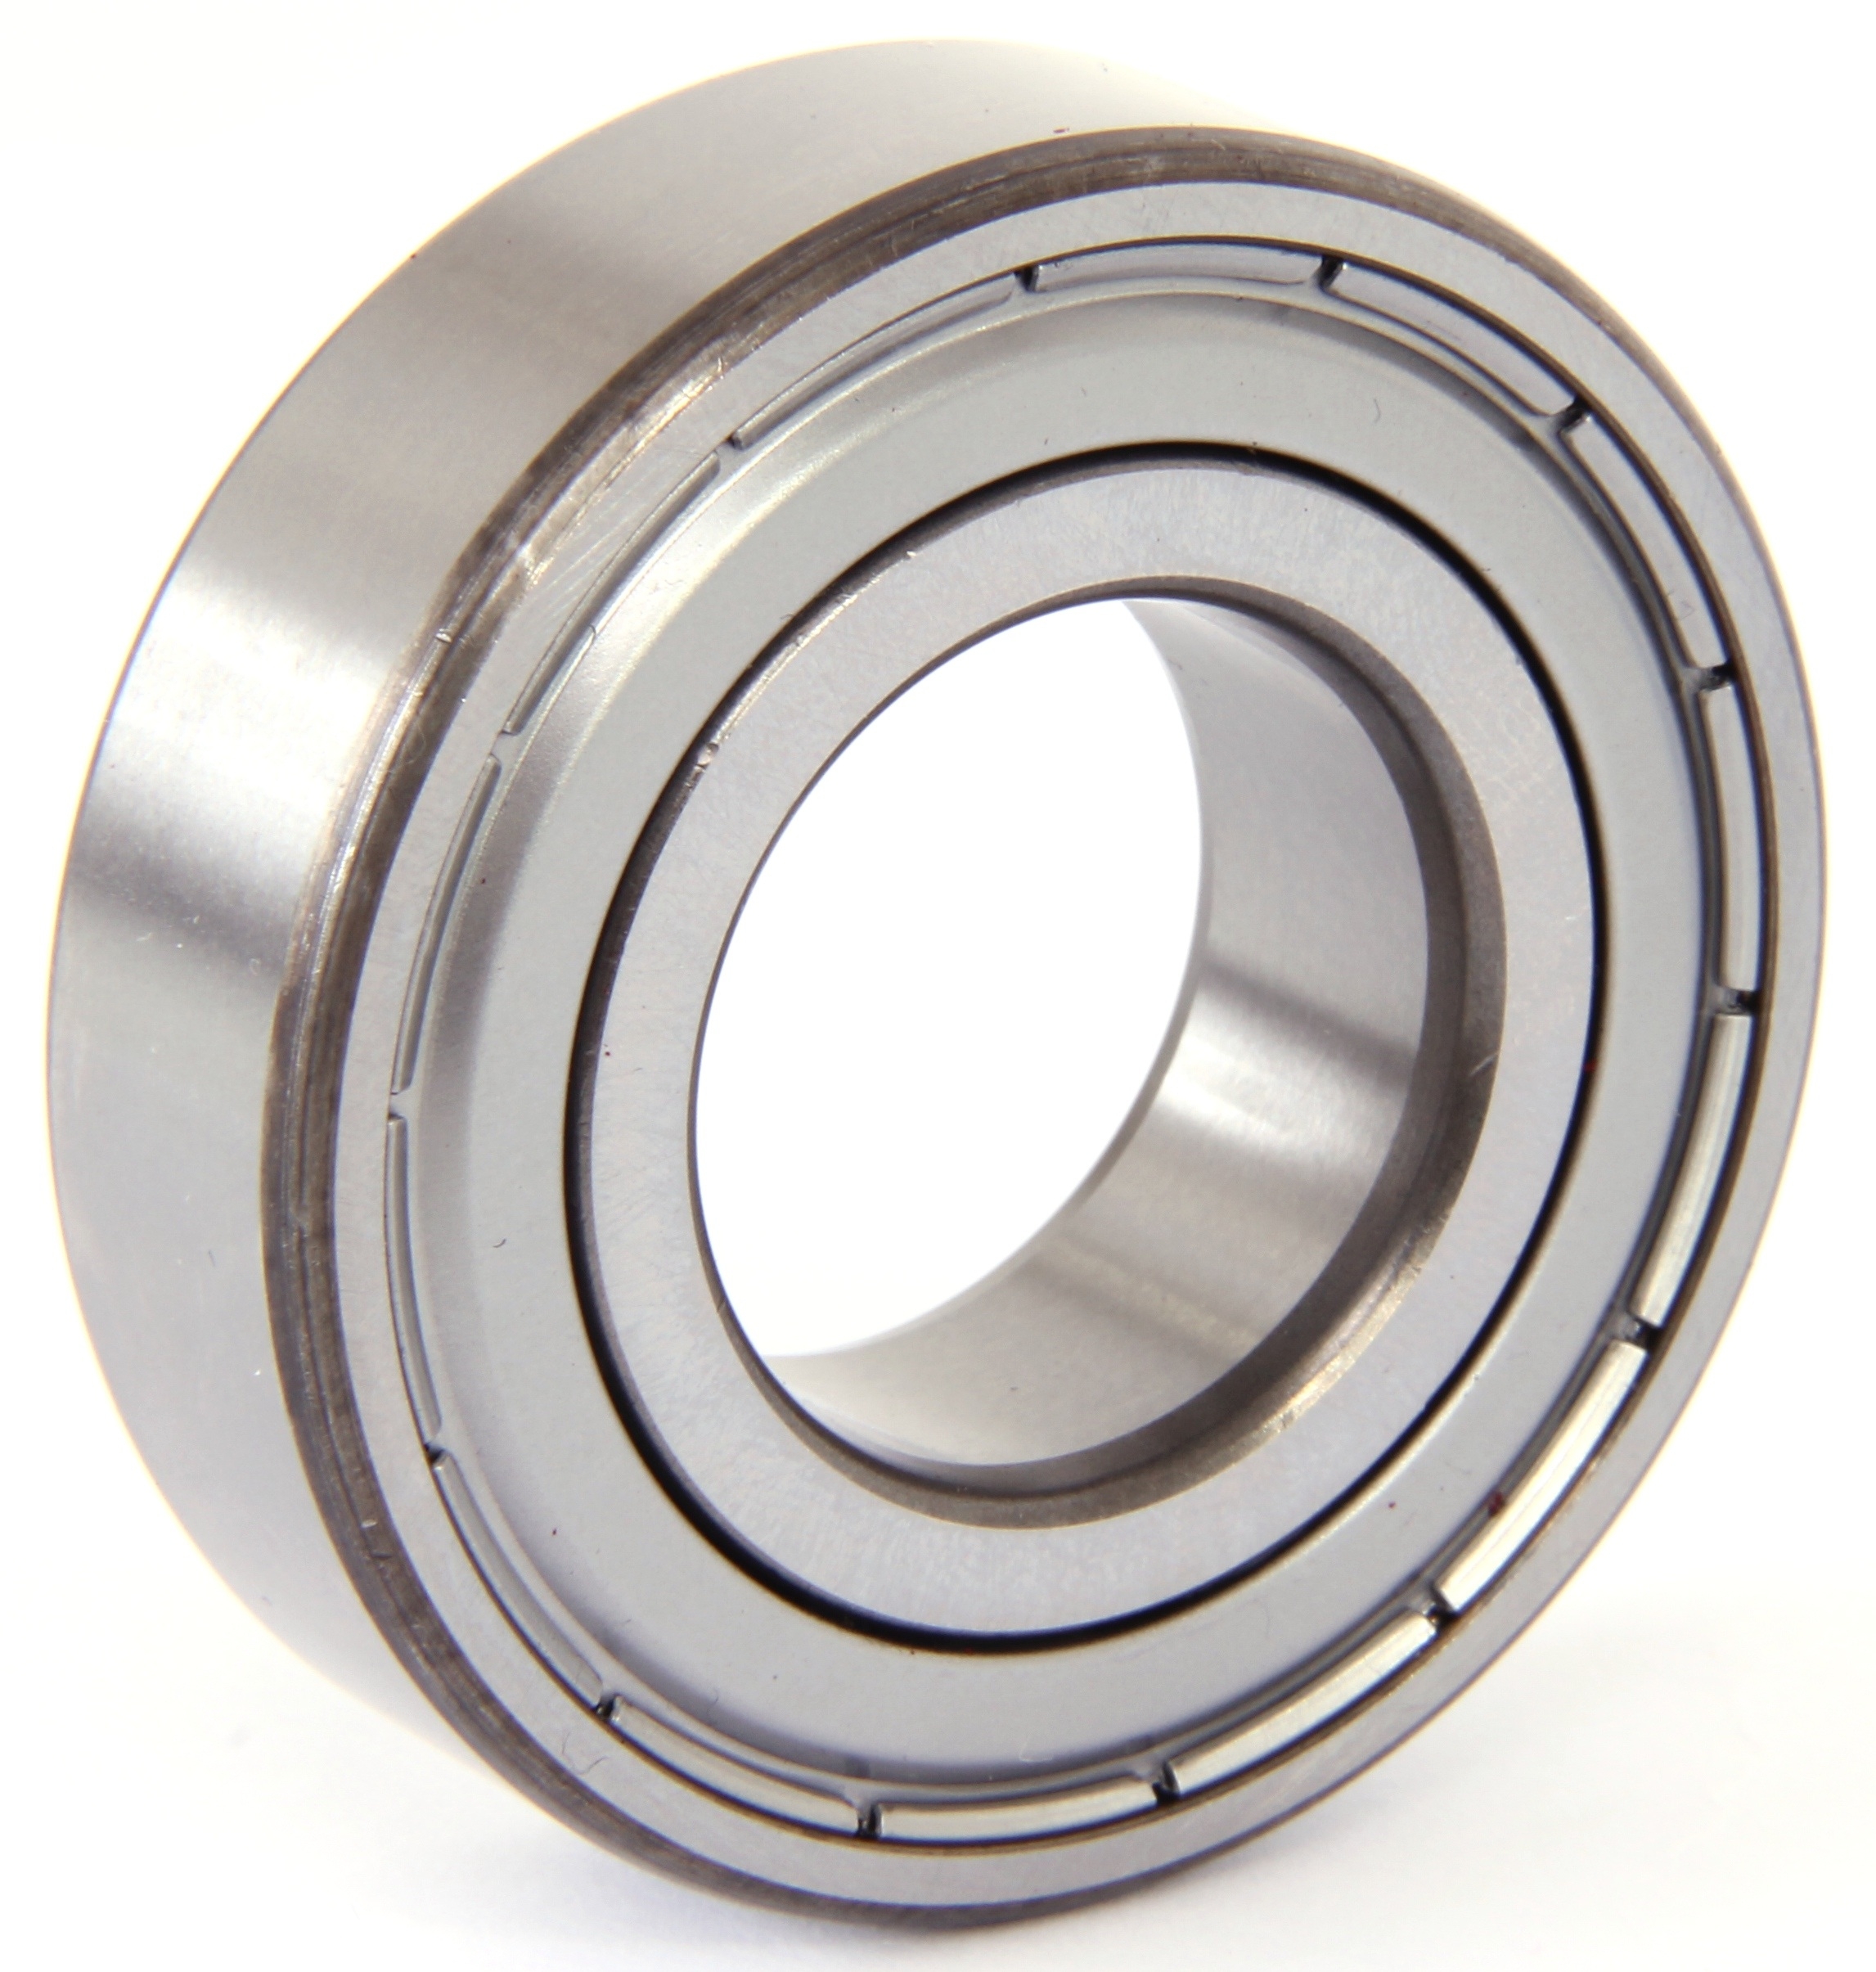 S6000Z Ball Bearing Stainless Steel Premium Brand ADR 10x26x8mm 1 Shield only 